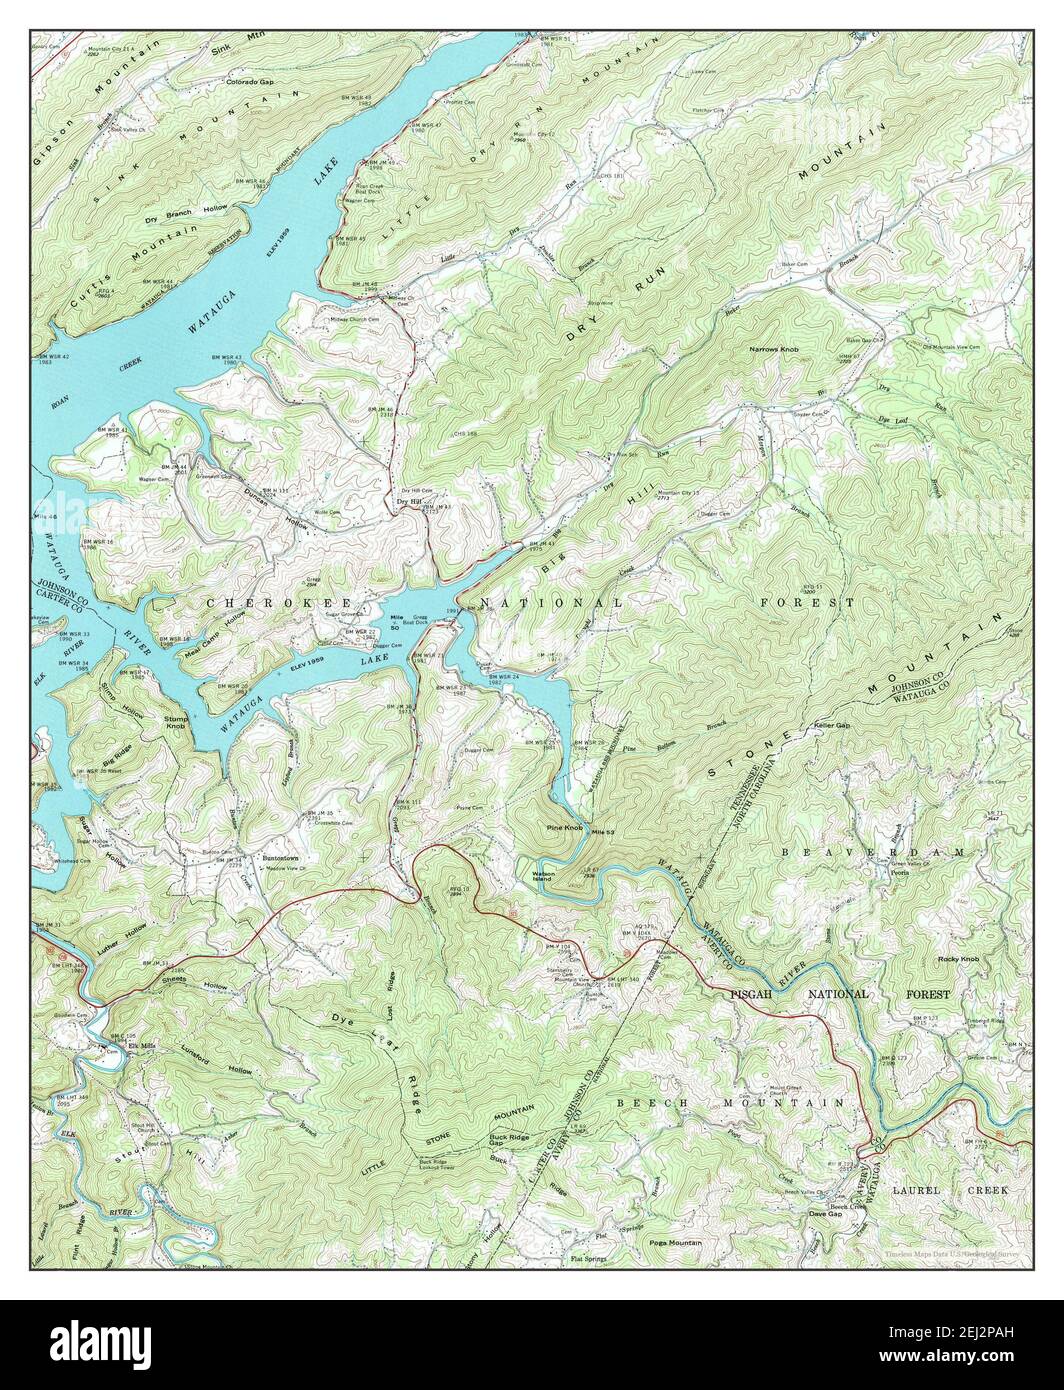 Elk Mills, Tennessee, map 1959, 1:24000, United States of America by Timeless Maps, data U.S. Geological Survey Stock Photo